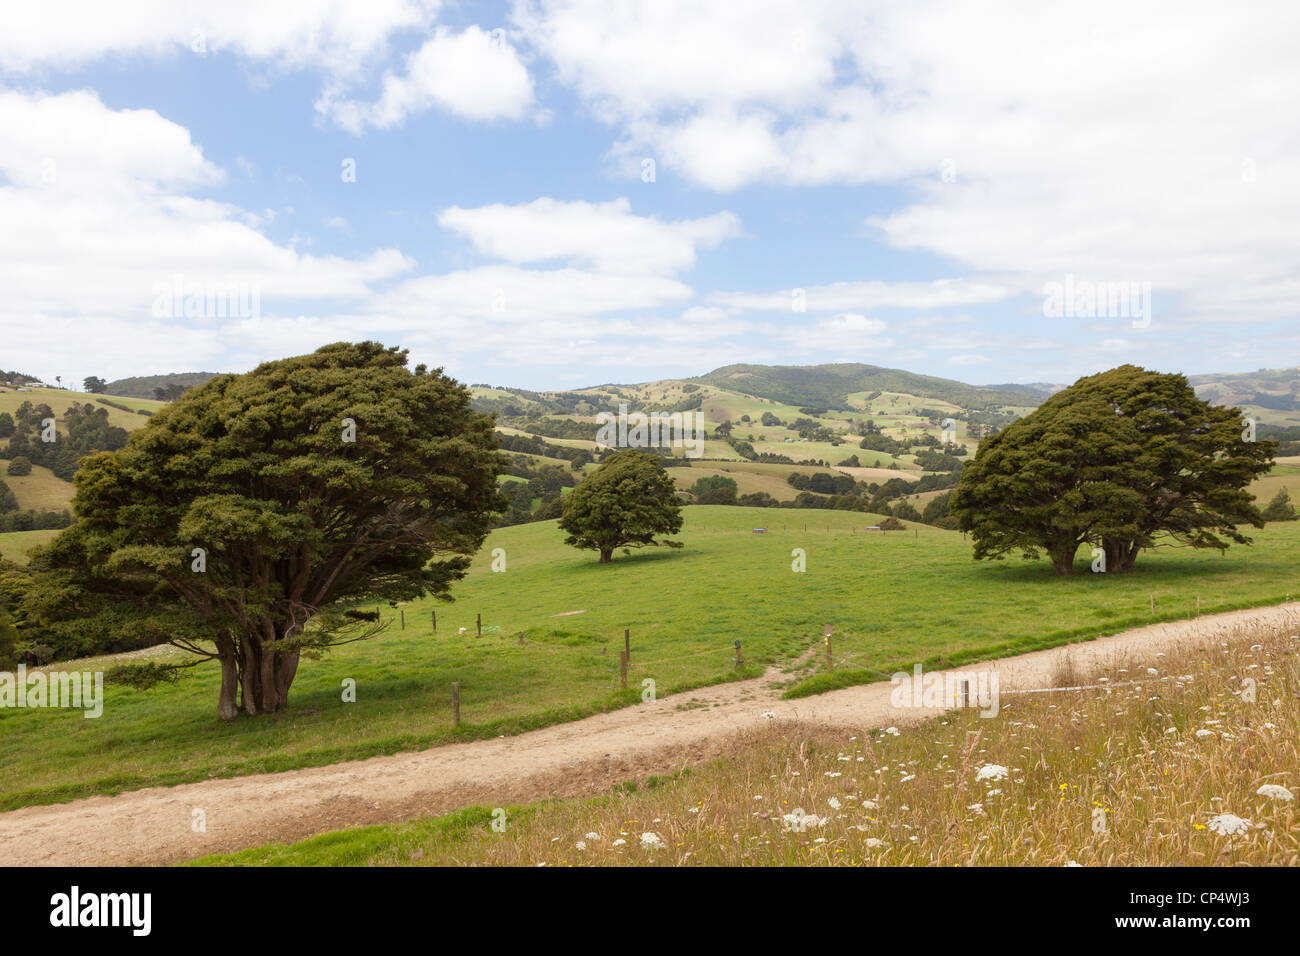 A pastoral scene with blue sky, fluffy clouds, and grass fields spotted with trees in northern New Zealand Stock Photo